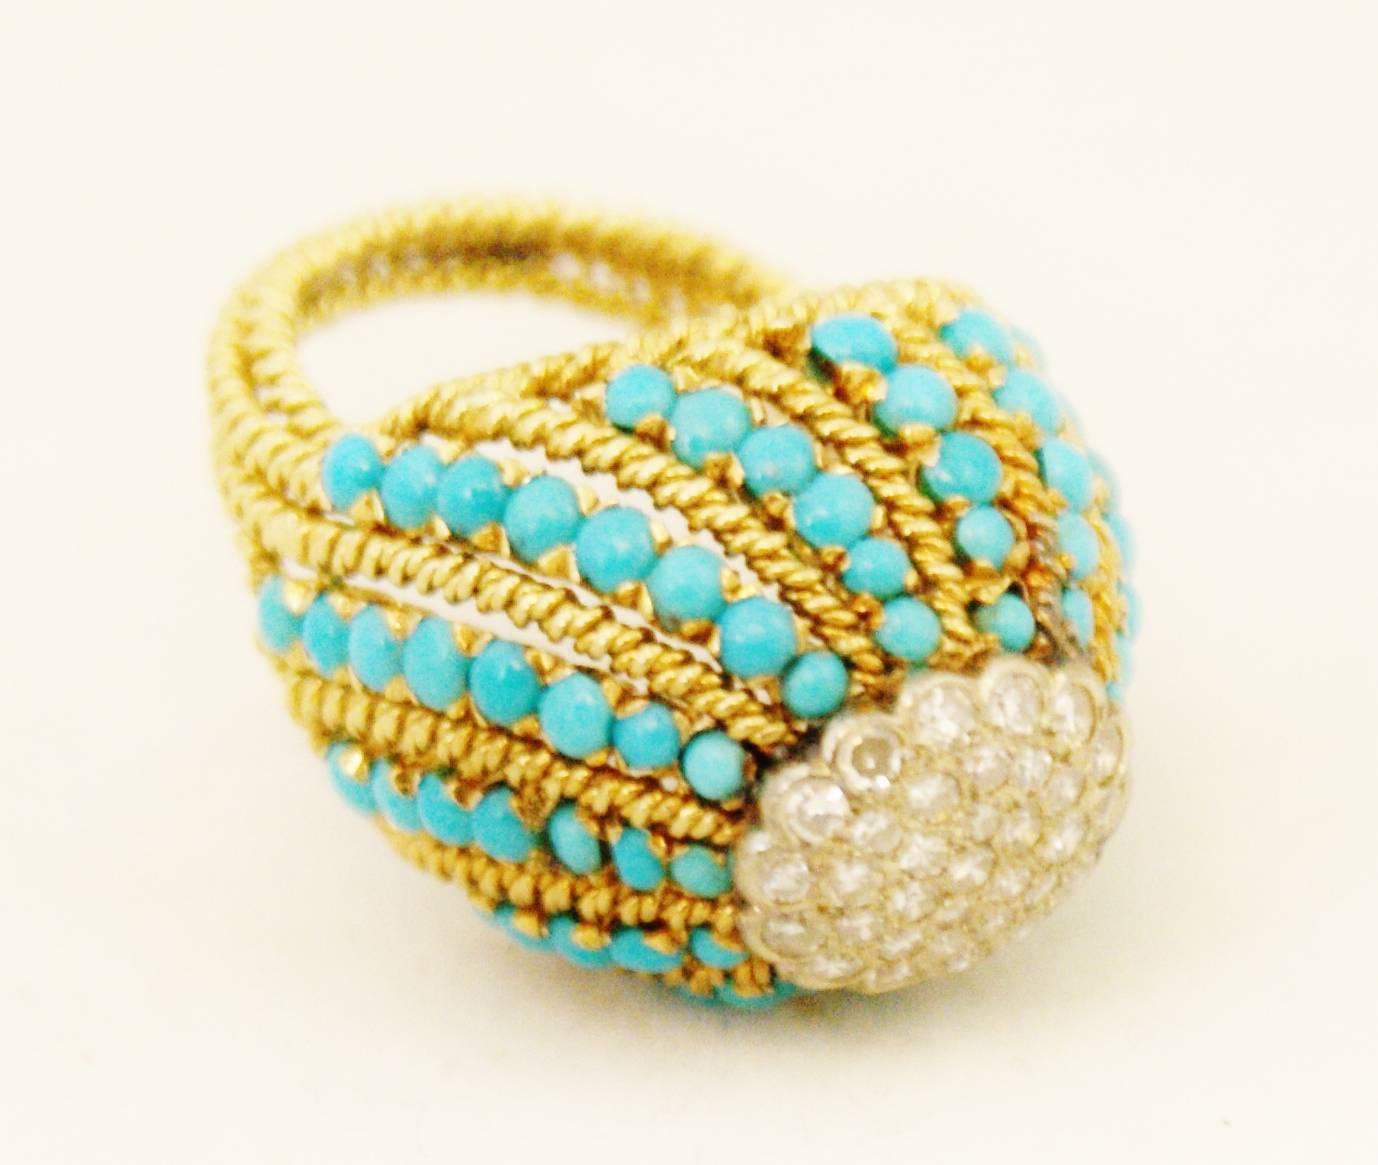 A very fine turquoise and diamond bombe cocktail ring set in 18ct yellow gold.
England circa 1950.
The turquoise are set in a wavy pattern around the central cluster of diamonds that forms the top of the dome. The bombe shape together with the rope